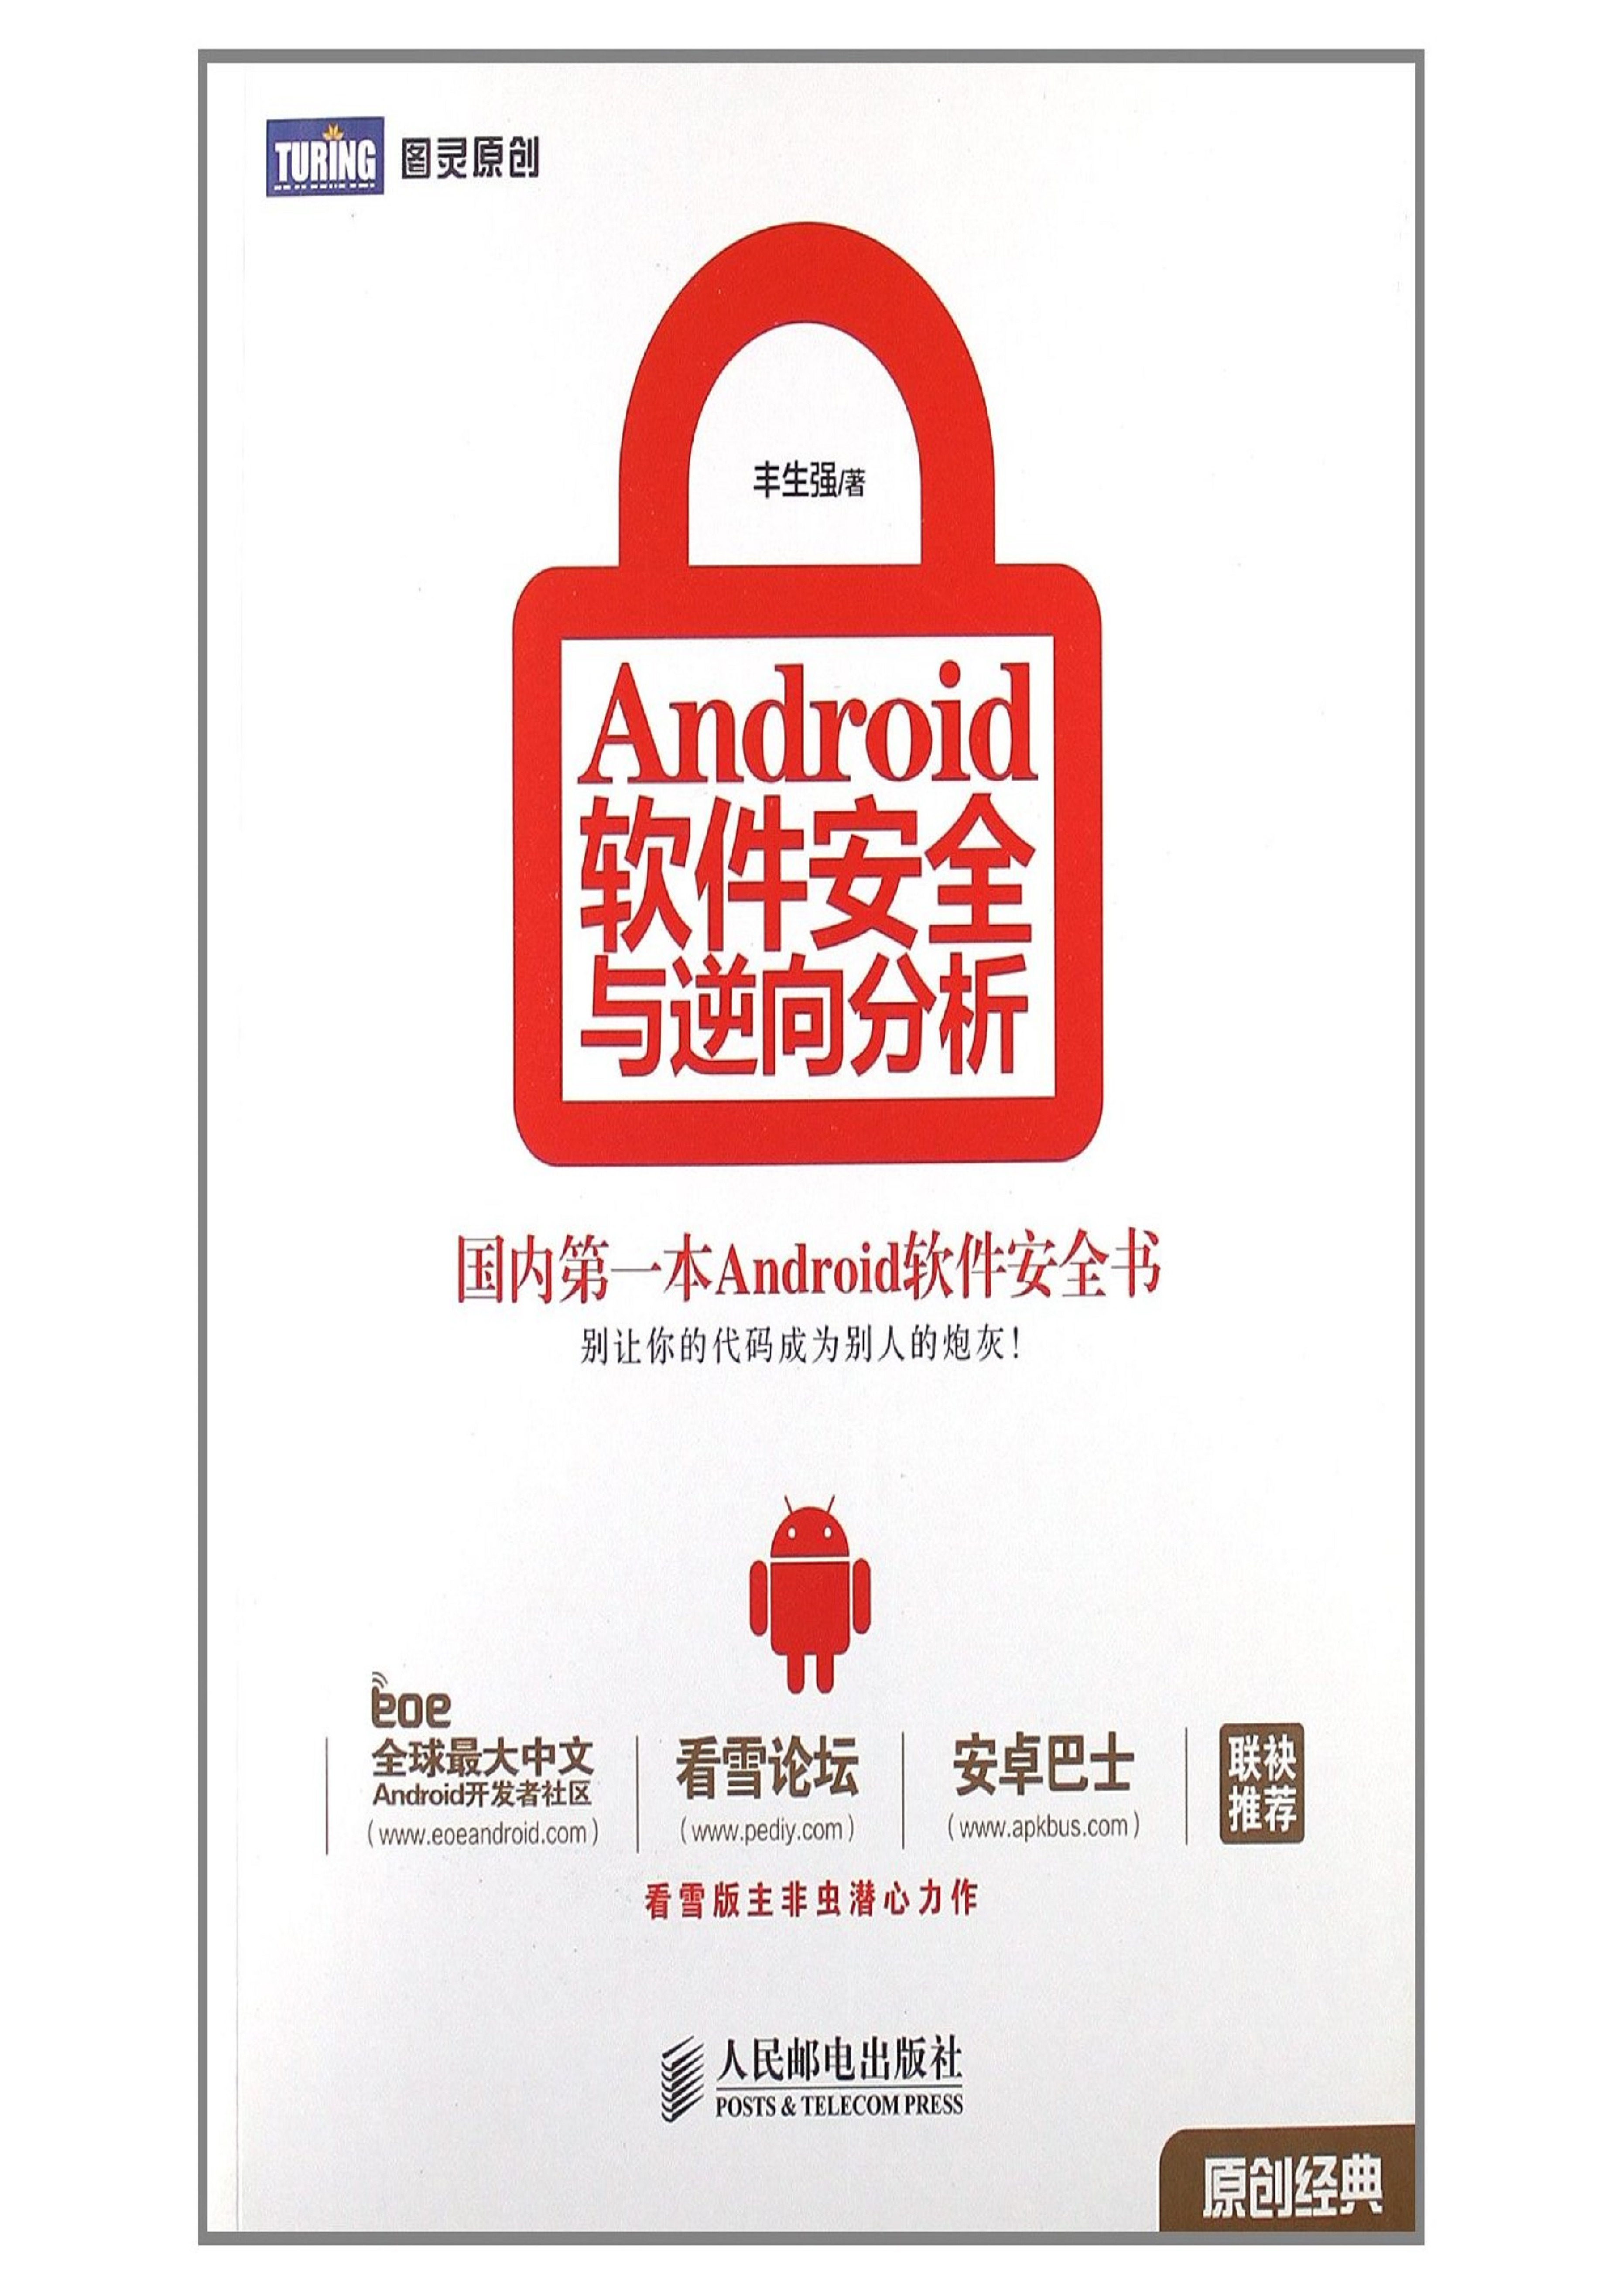 Android软件安全与逆向分析（完整版）